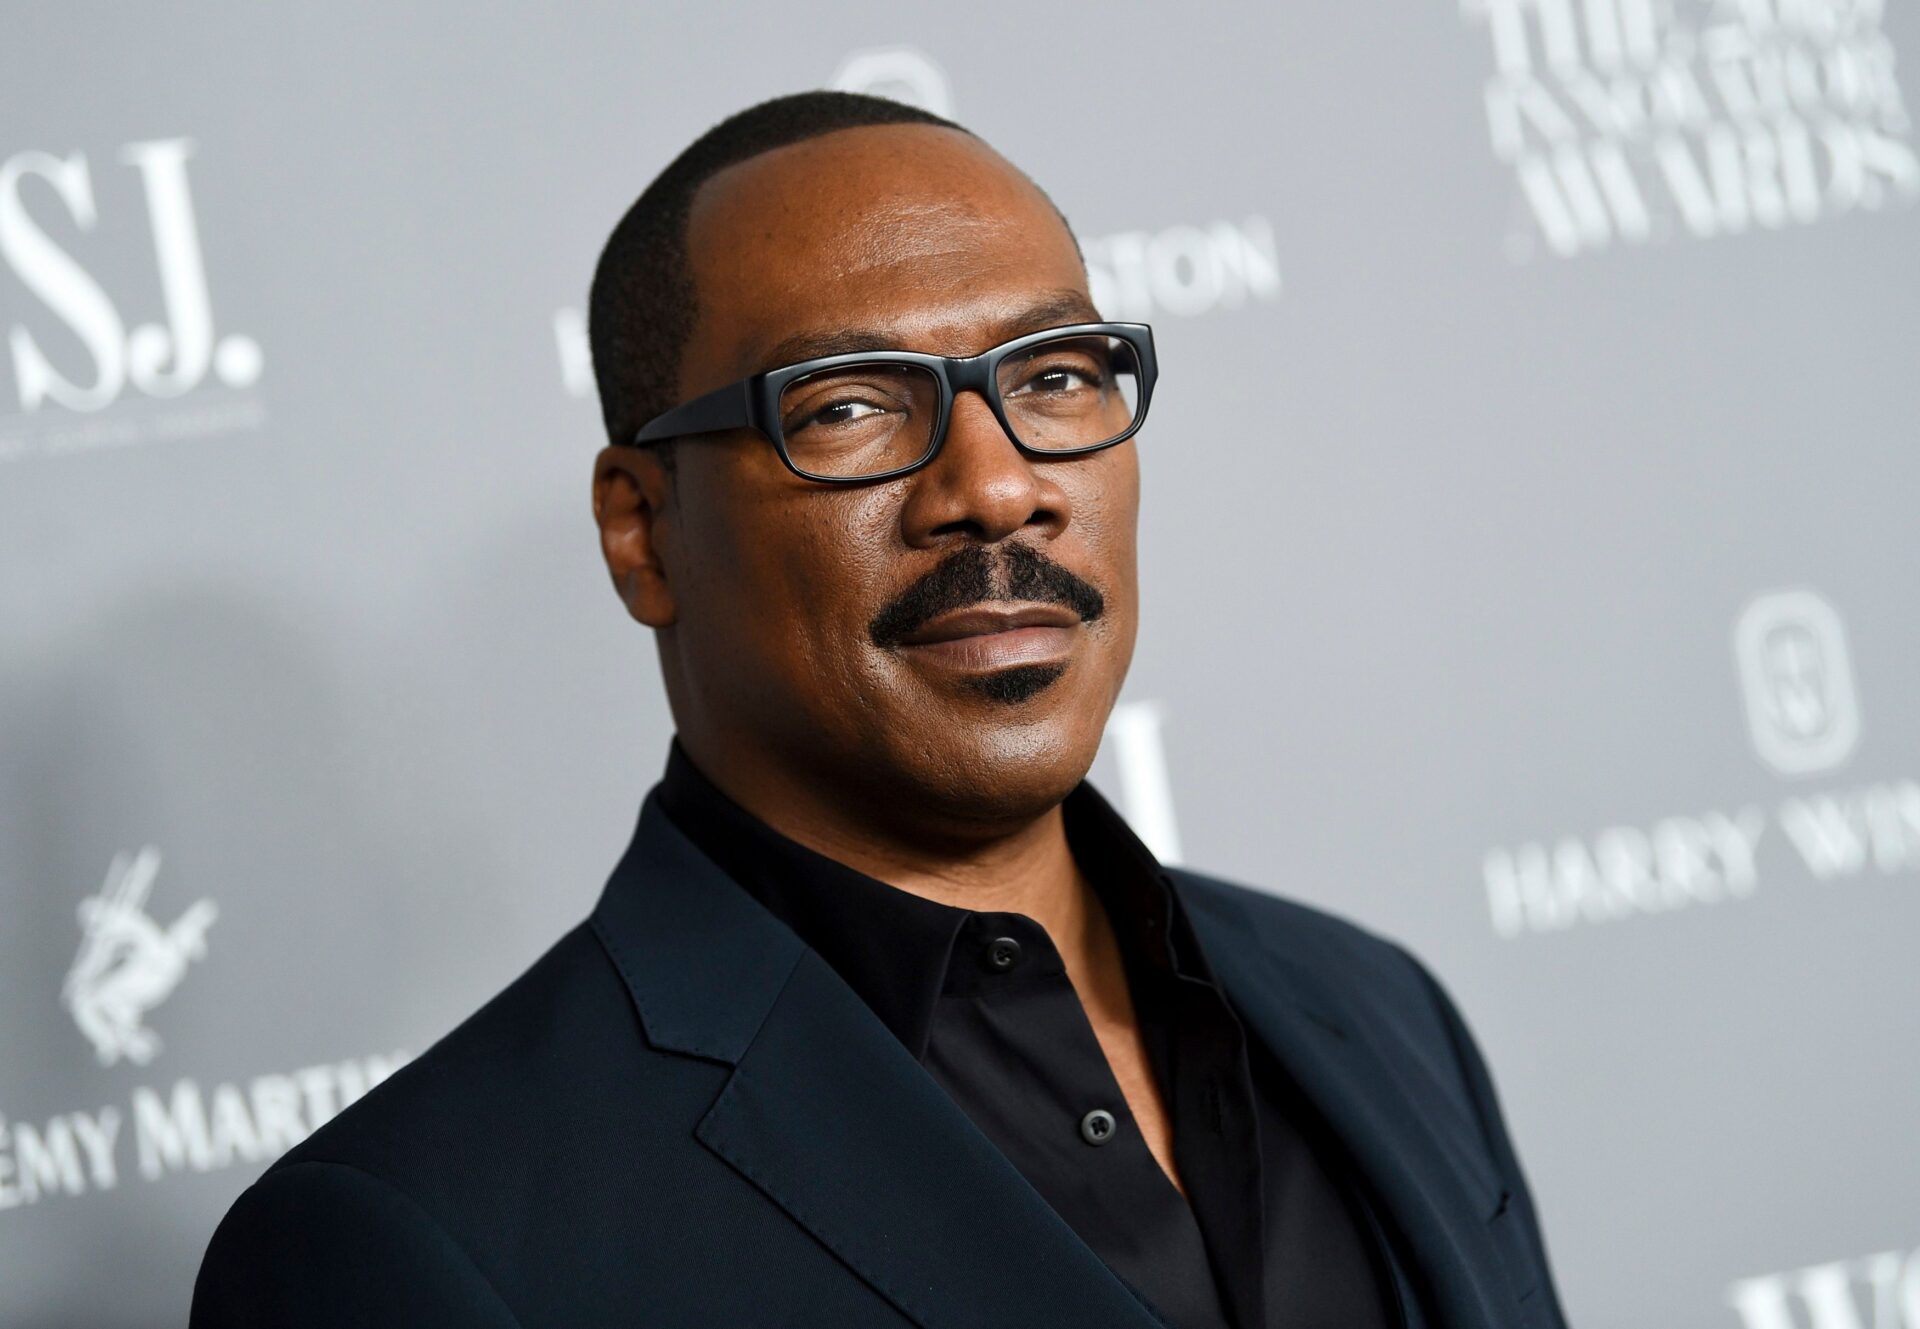 Mandatory Credit: Photo by Evan Agostini/Invision/AP/Shutterstock (10468167bd)
Eddie Murphy attends the WSJ. Magazine 2019 Innovator Awards at the Museum of Modern Art, in New York
WSJ Magazine 2019 Innovator Awards, New York, USA - 06 Nov 2019